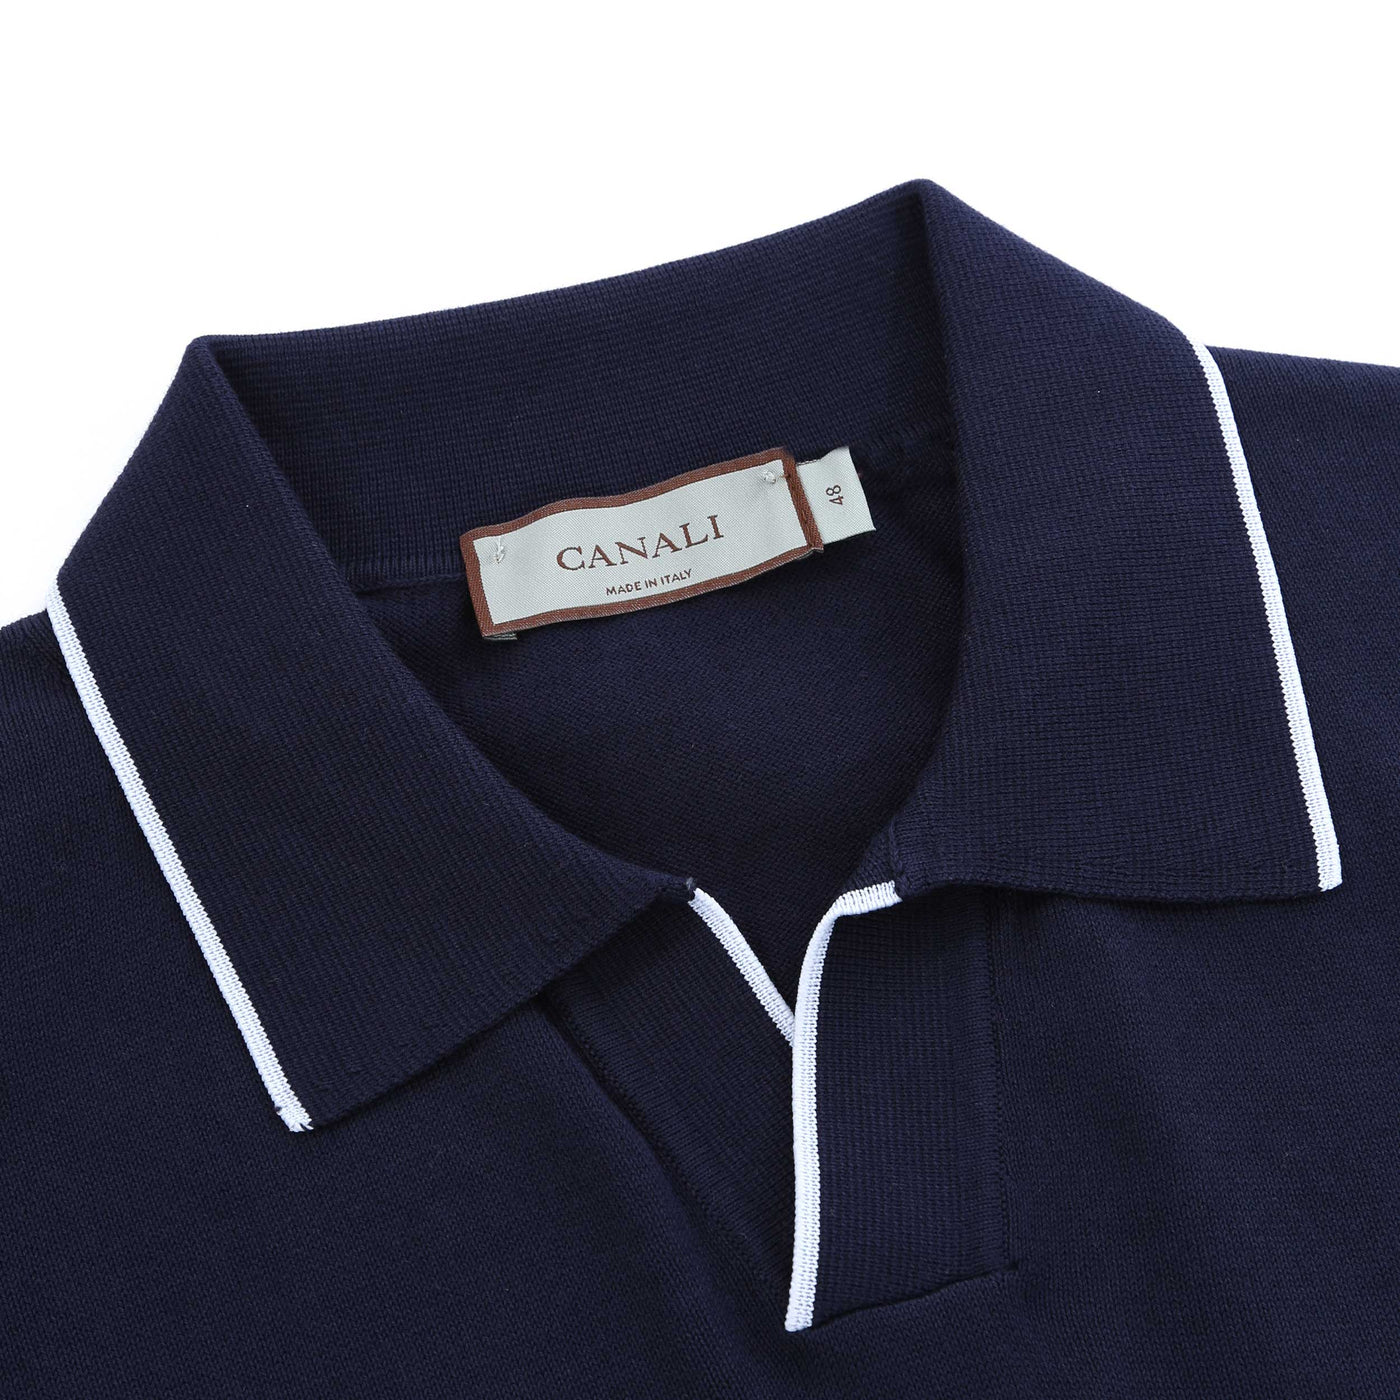 Canali Open Neck Knitted Polo in Navy Placket